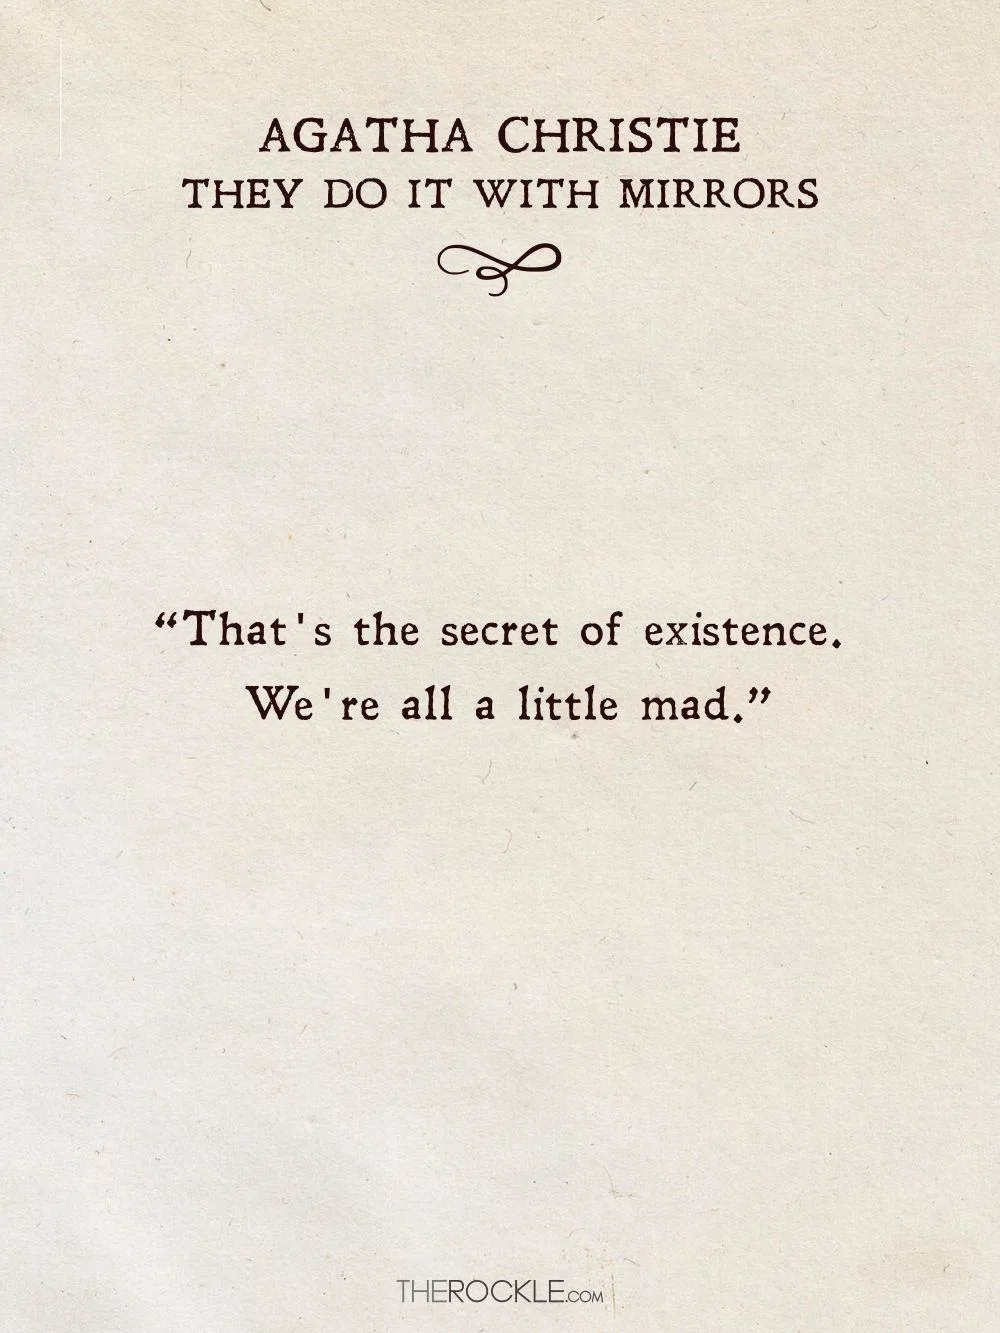 They Do It with Mirrors: “That’s the secret of existence. We’re all a little mad.” 